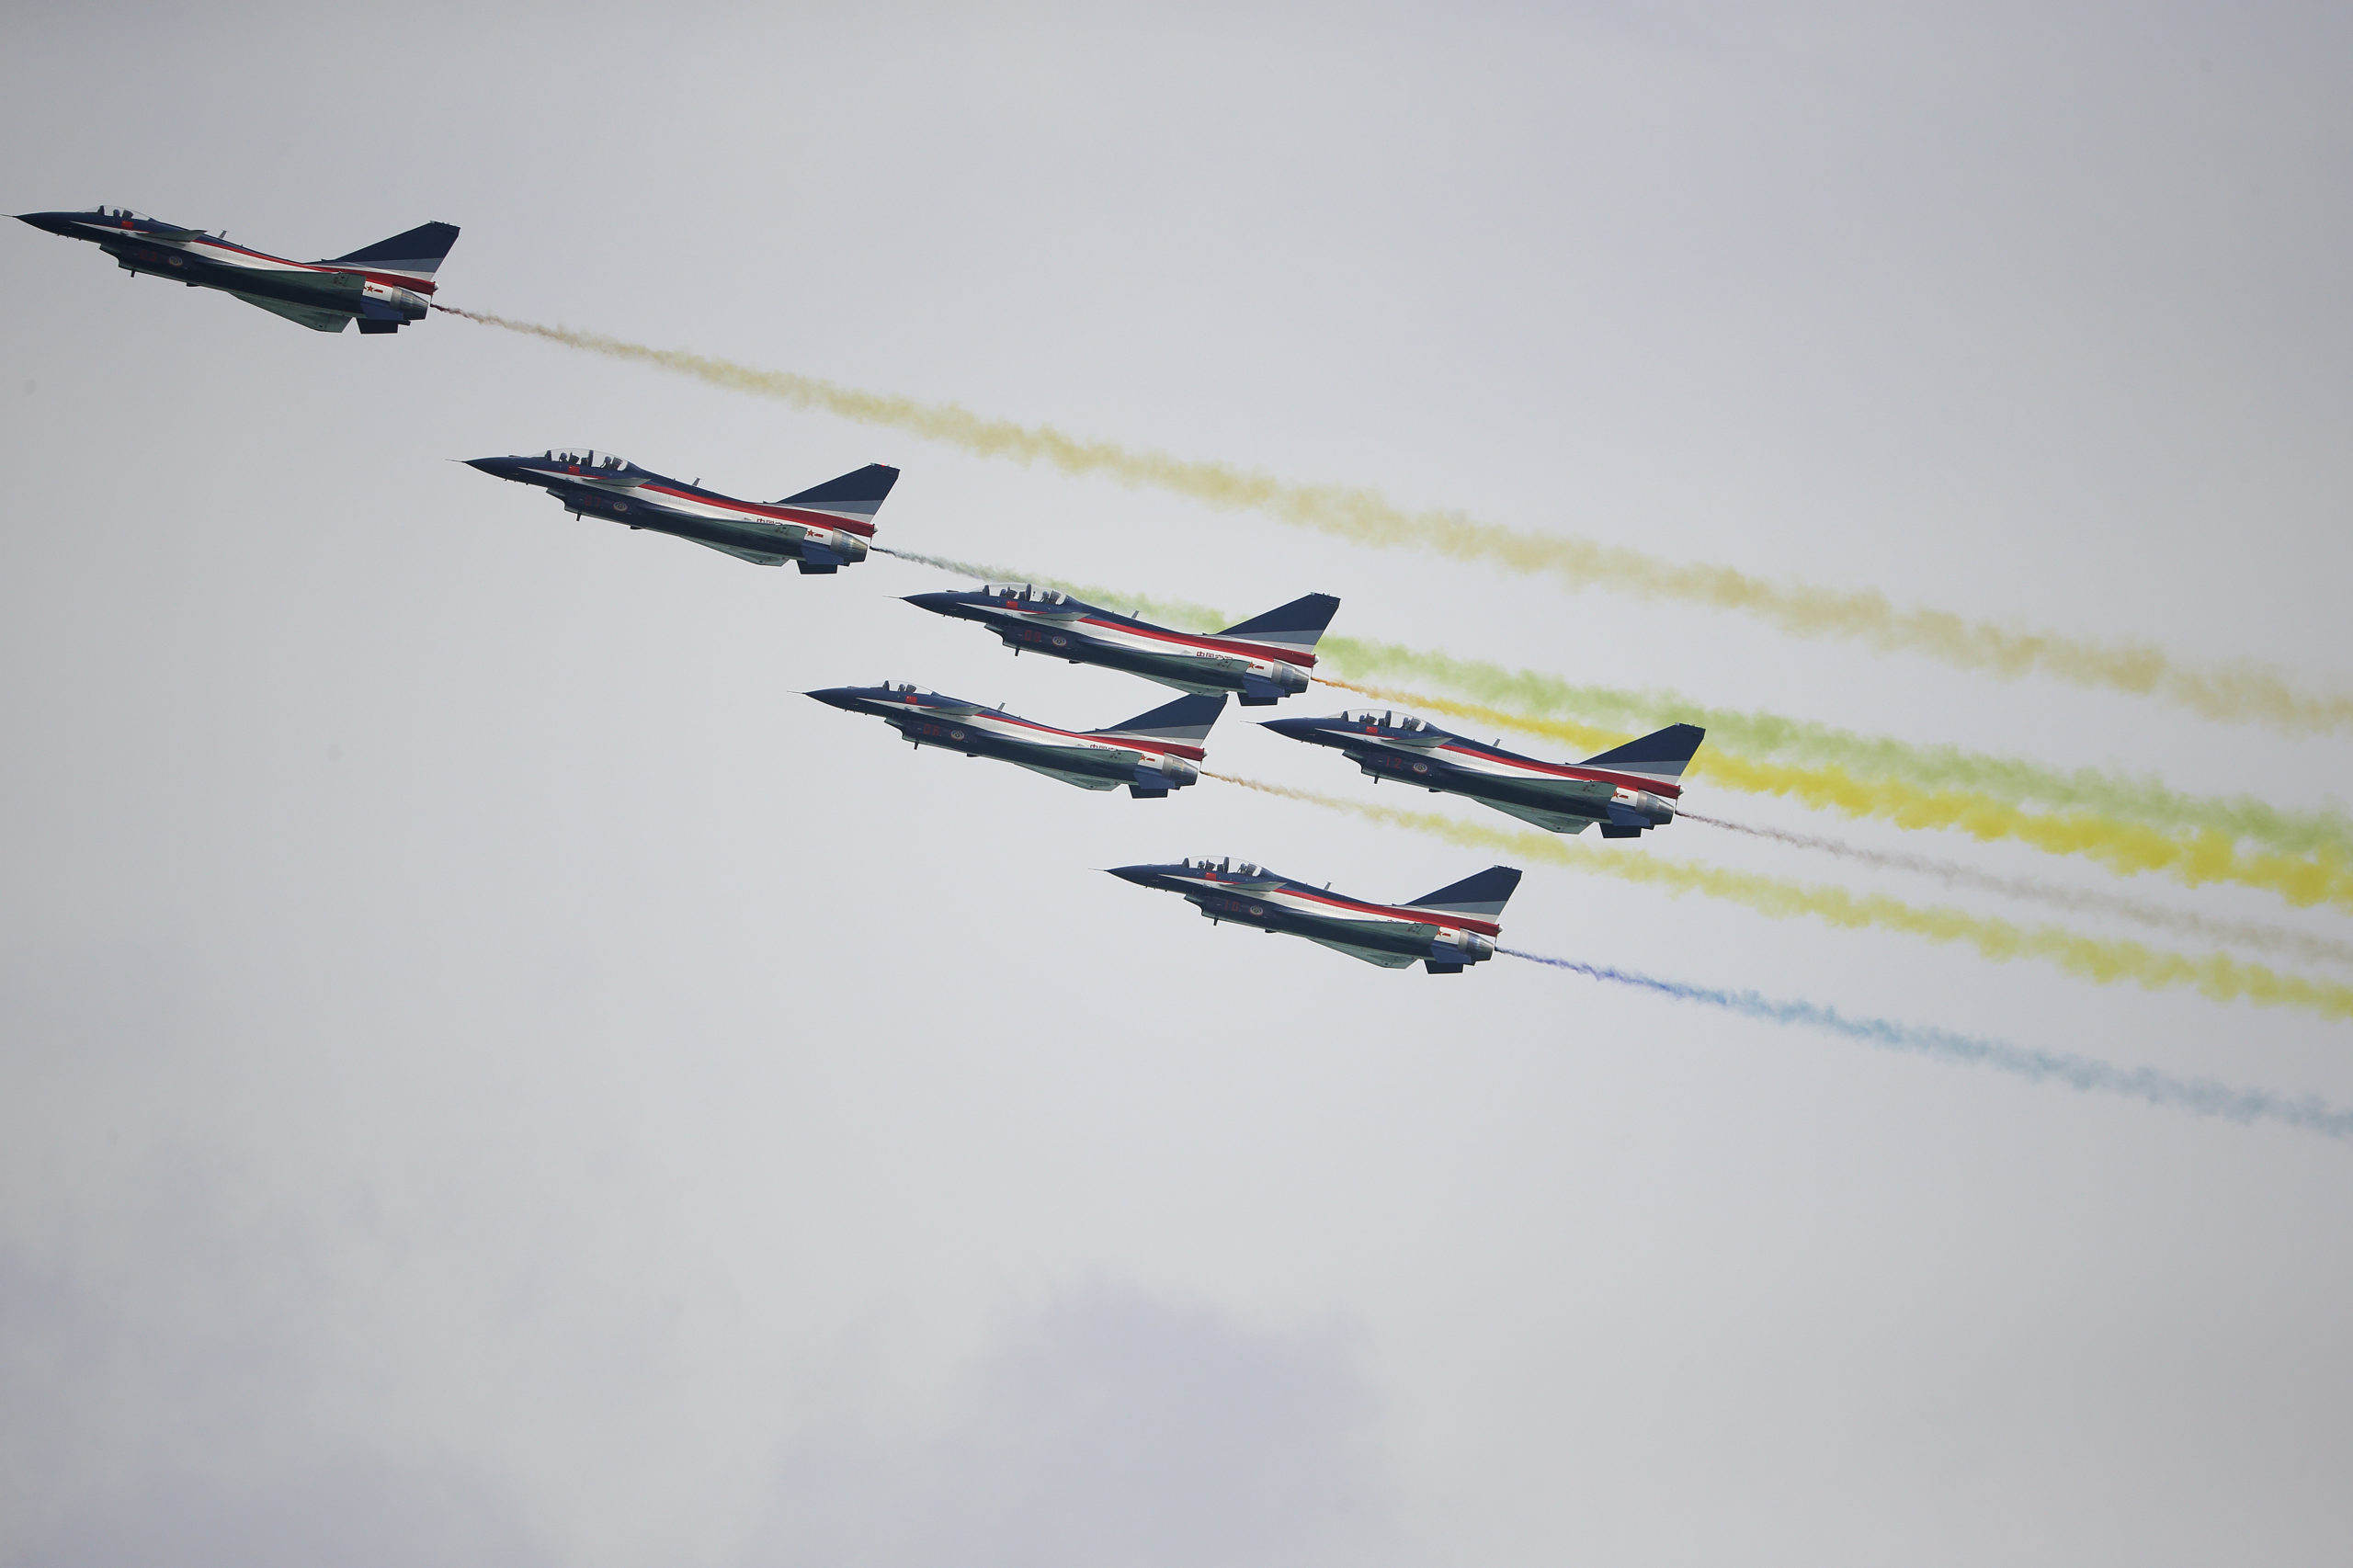 SINGAPORE - FEBRUARY 09: J-10 fighter jets of China's People's Liberation Army Air Force Ba Yi aerobatics team perform an aerial display during the Singapore Airshow media preview on February 9, 2020 in Singapore.